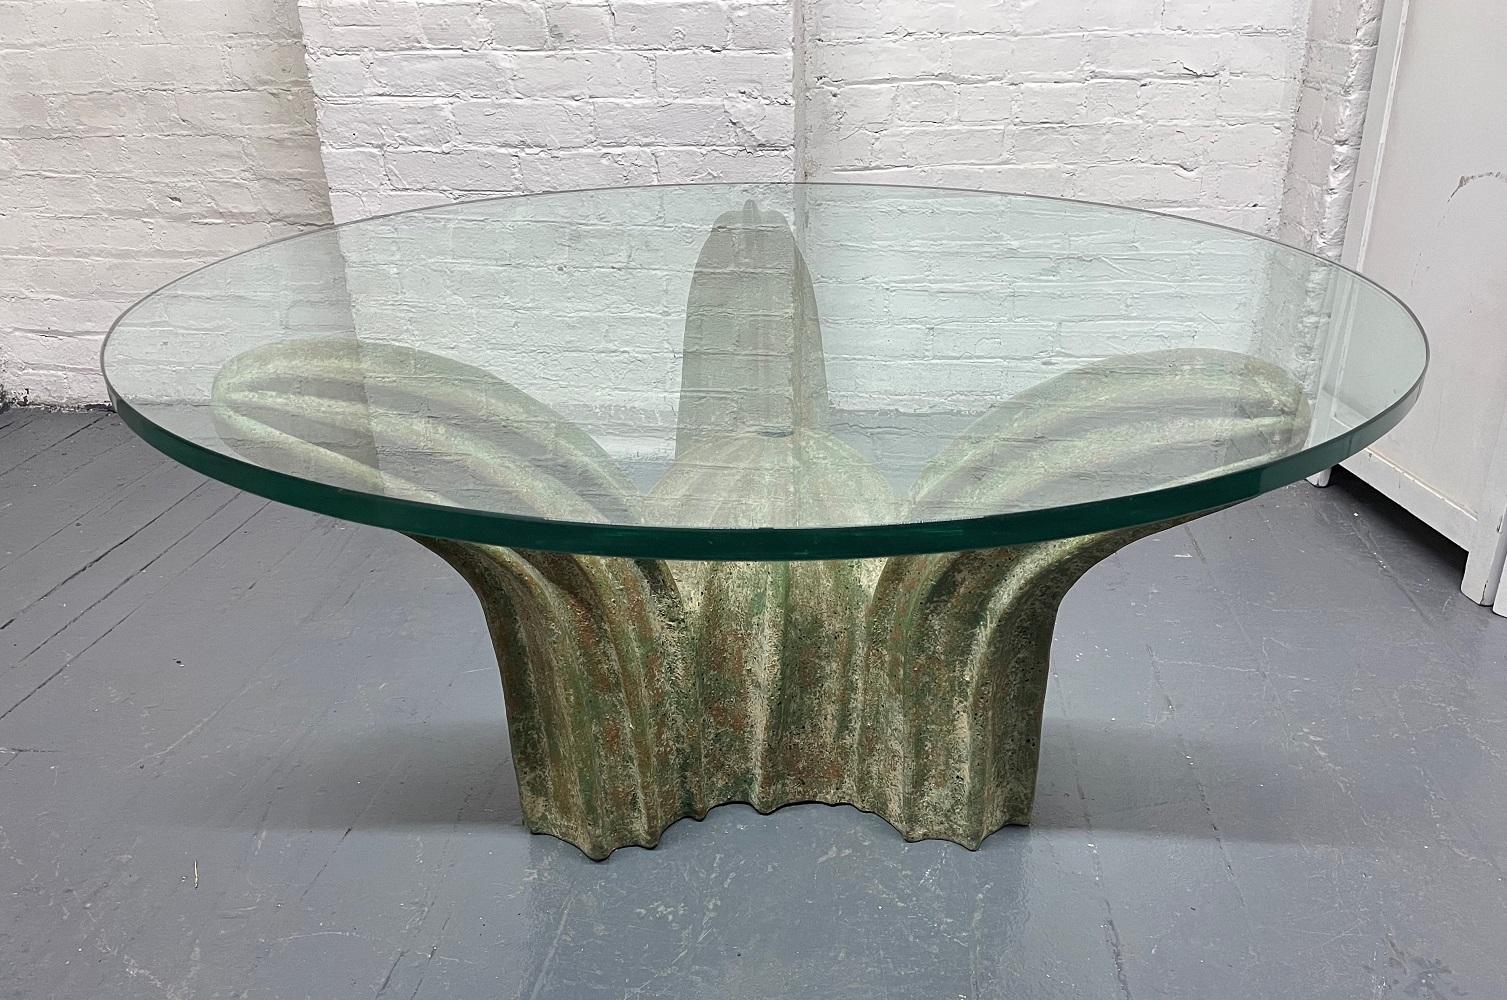 Italian sculptural Glazed Ceramic coffee table. The table has a nice round one inch thick glass top.